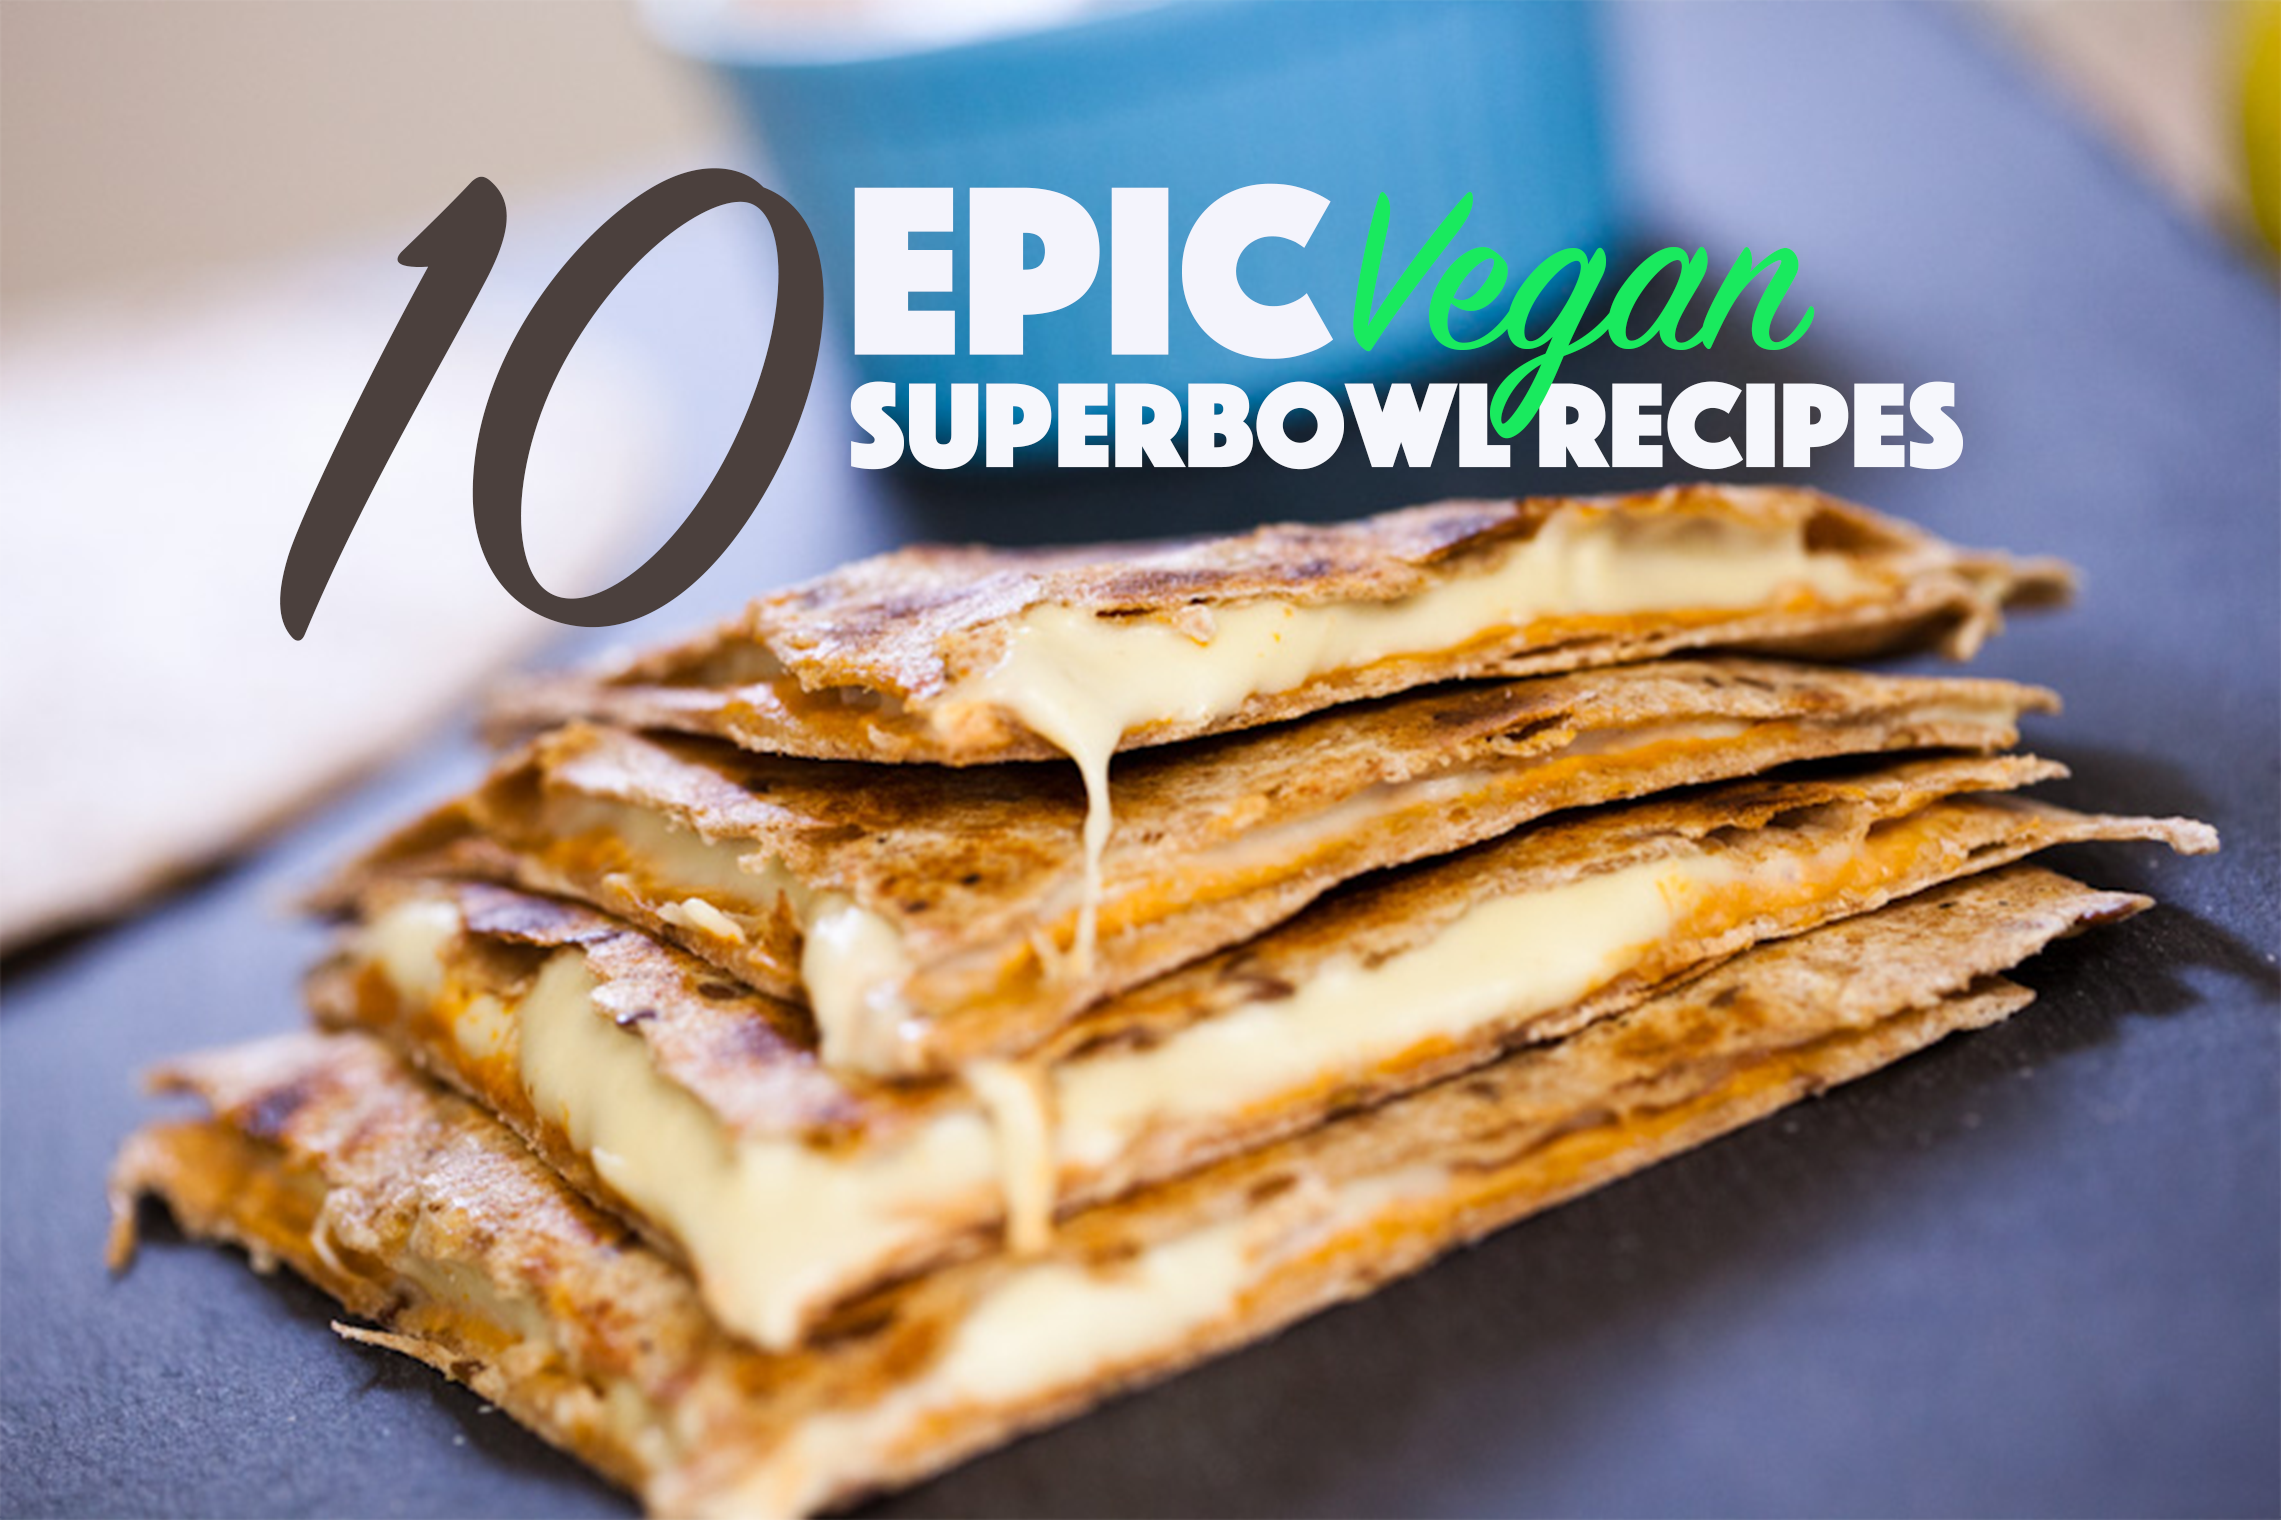 10 Epic Vegan Super Bowl Recipes that are guaranteed crowd-pleasers! Delicious and easy to prepare | Healthy and Gluten-free options